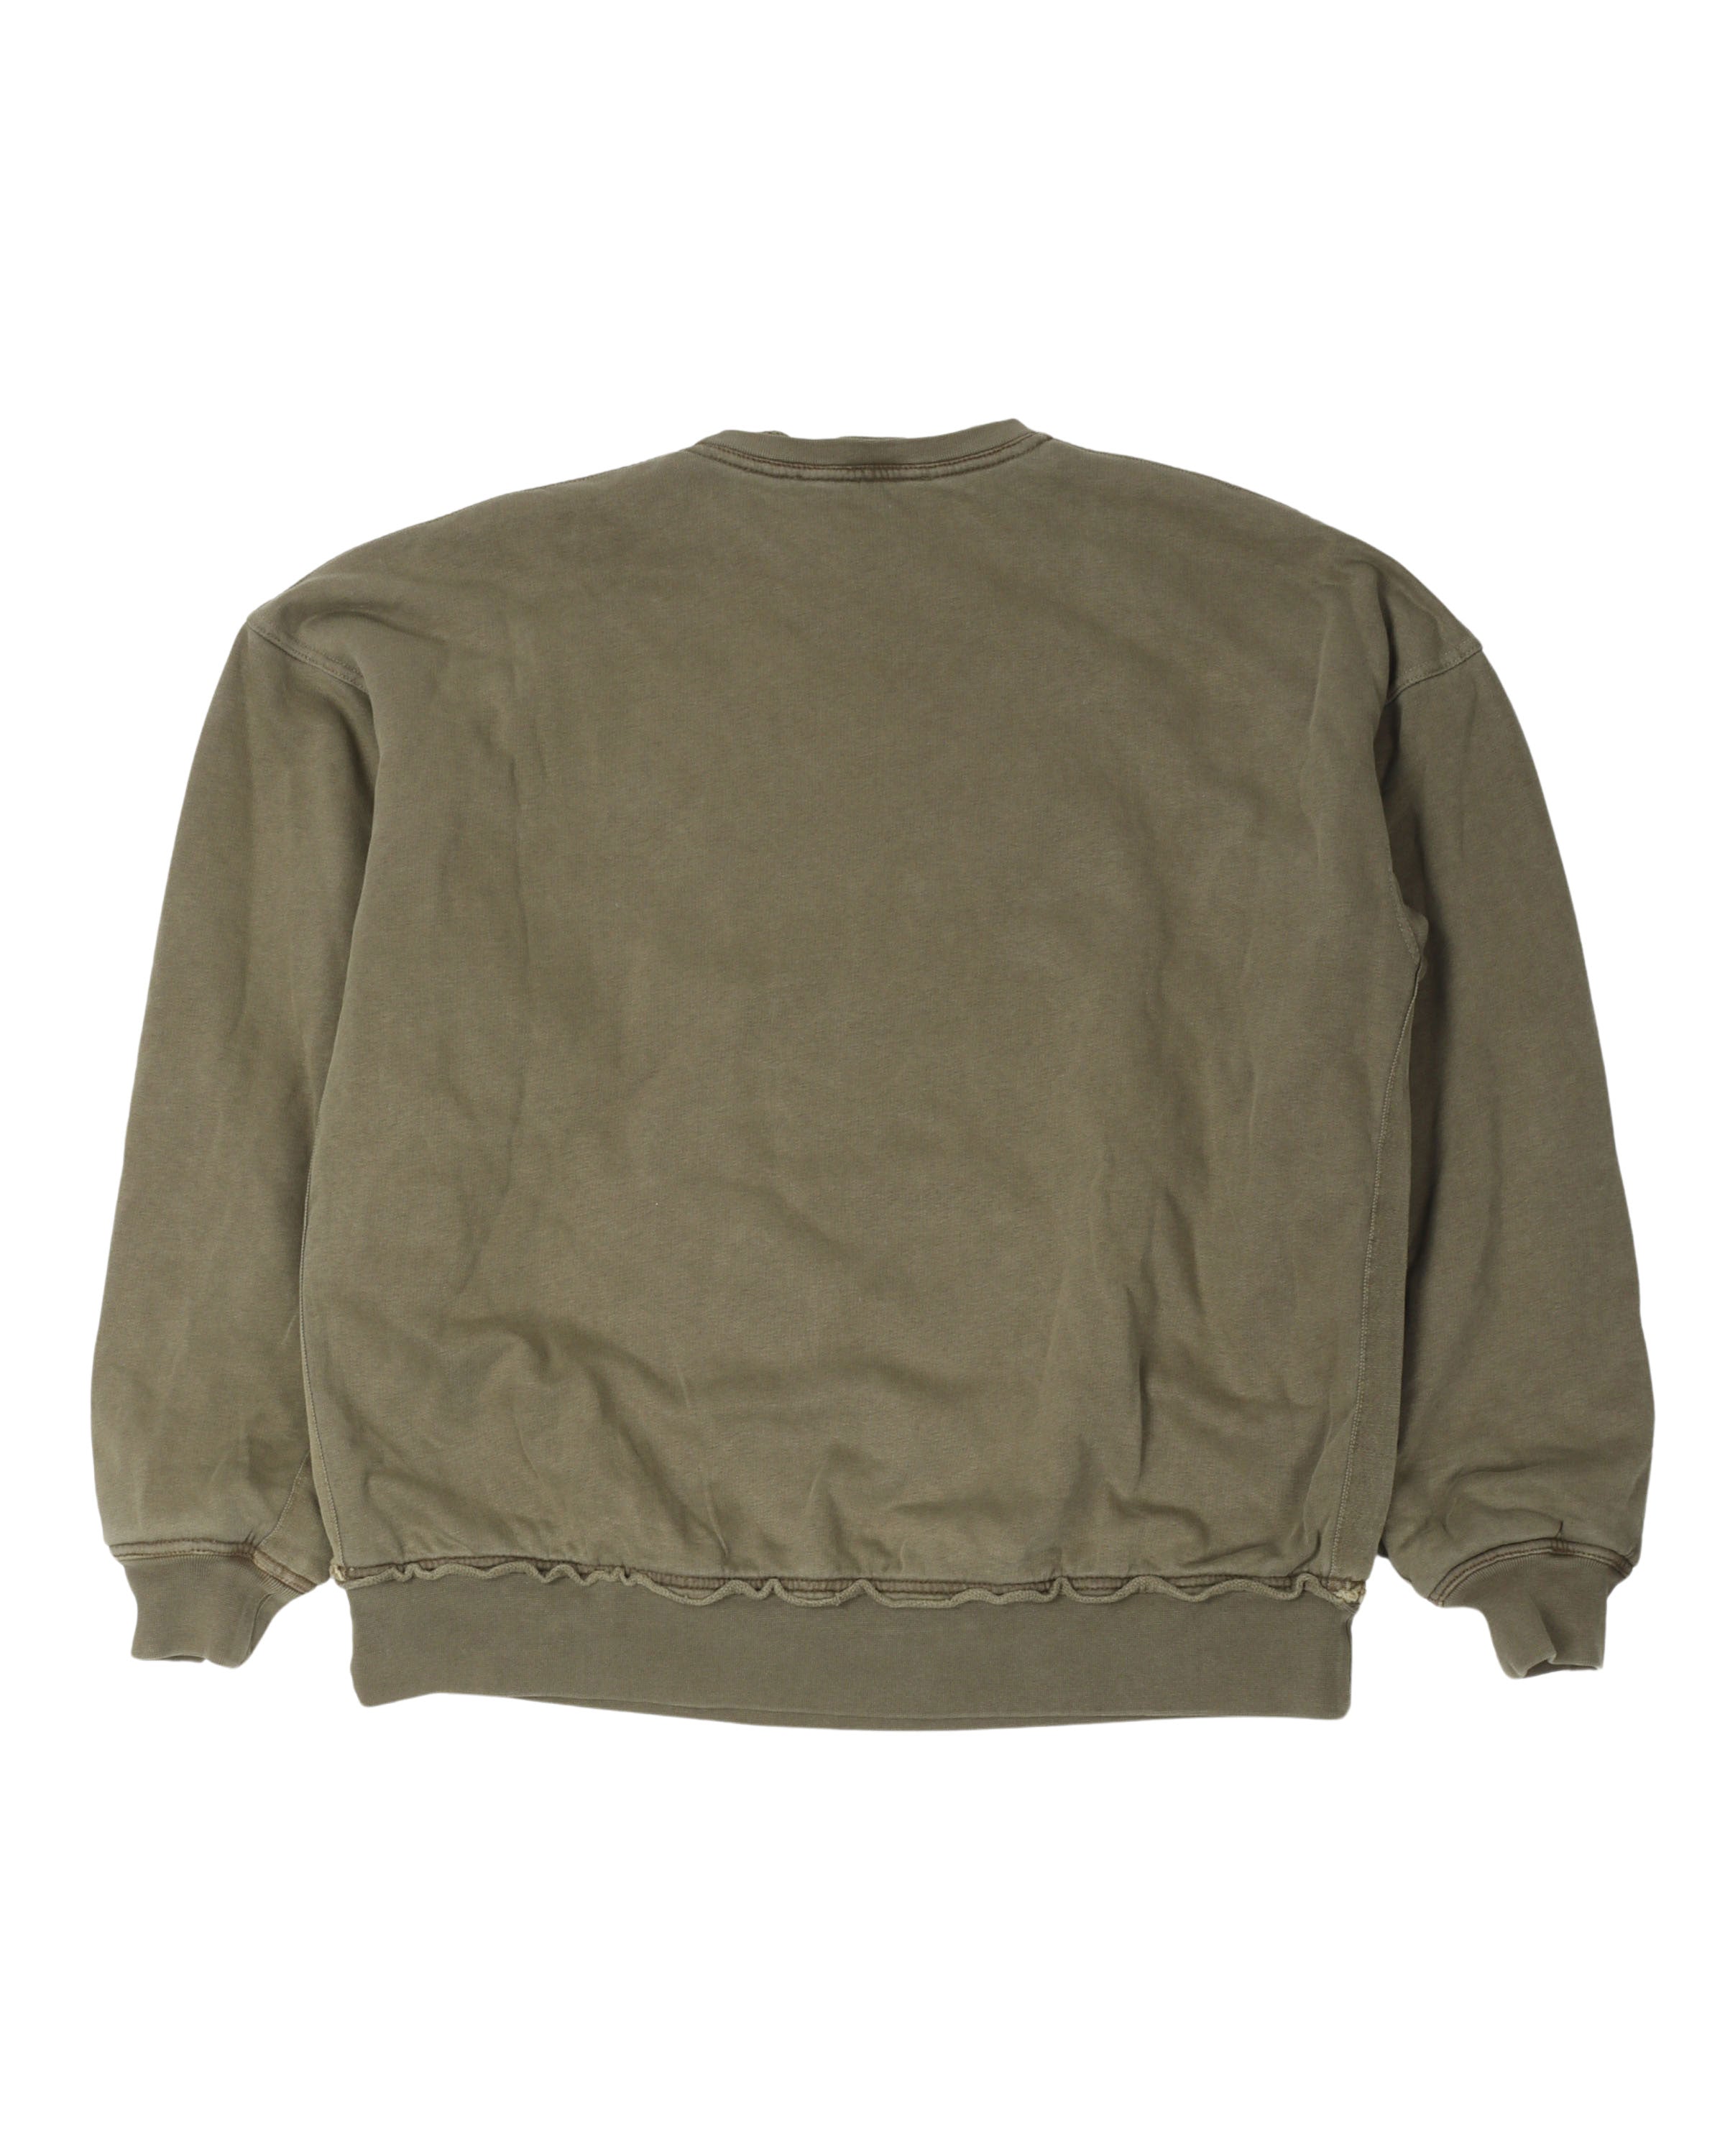 Olive 2020 Reissue Perth Sweater